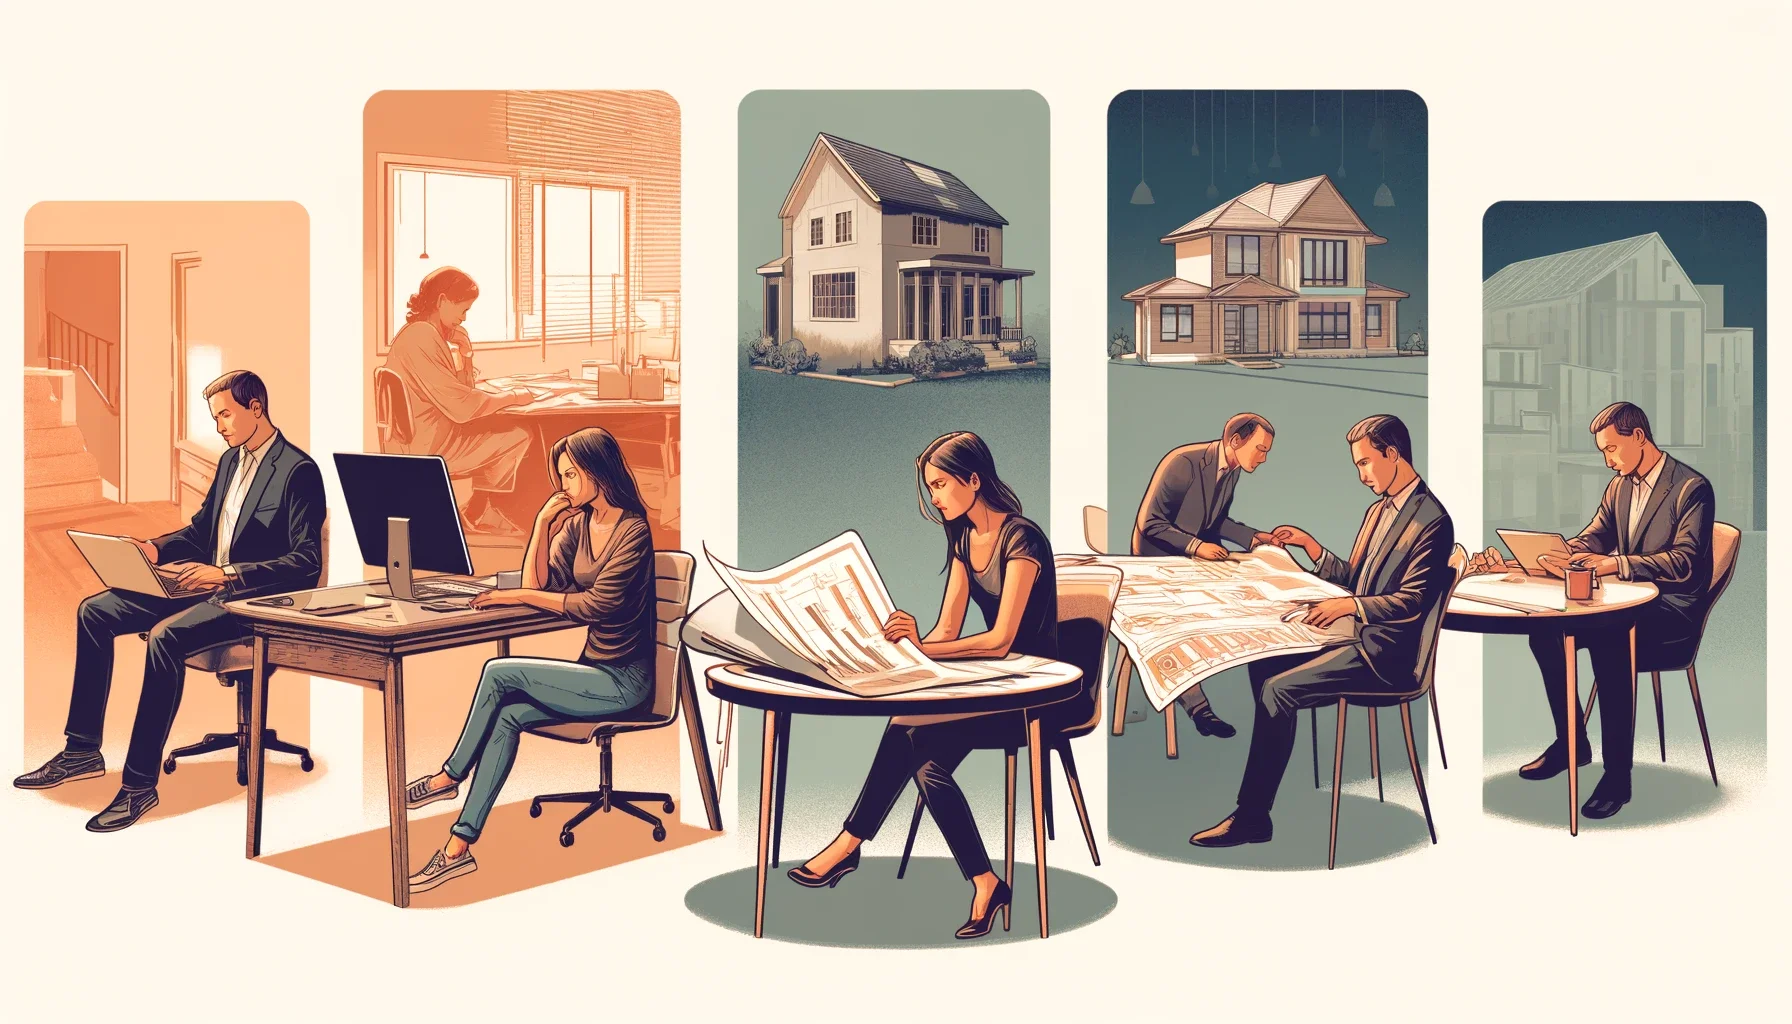 Sequential artwork showing people at different stages of mortgage planning process.